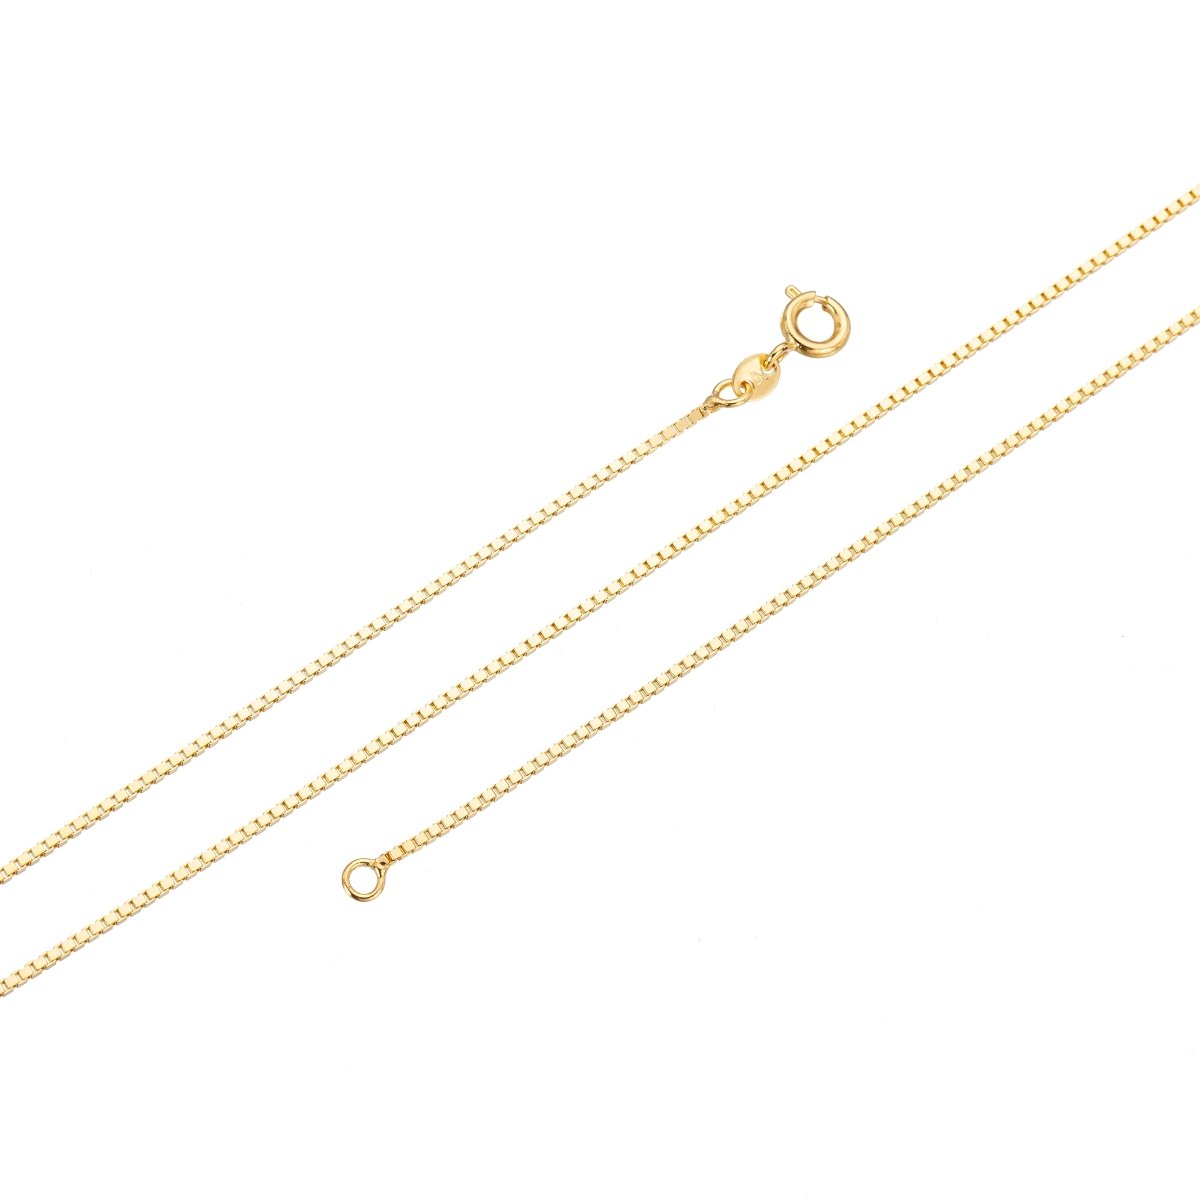 17.5 inch ready to wear 24k Gold Filled Box Chain Necklace, Layering Dainty Box Chain ForJewelry Making with Pendant Charm - DLUXCA